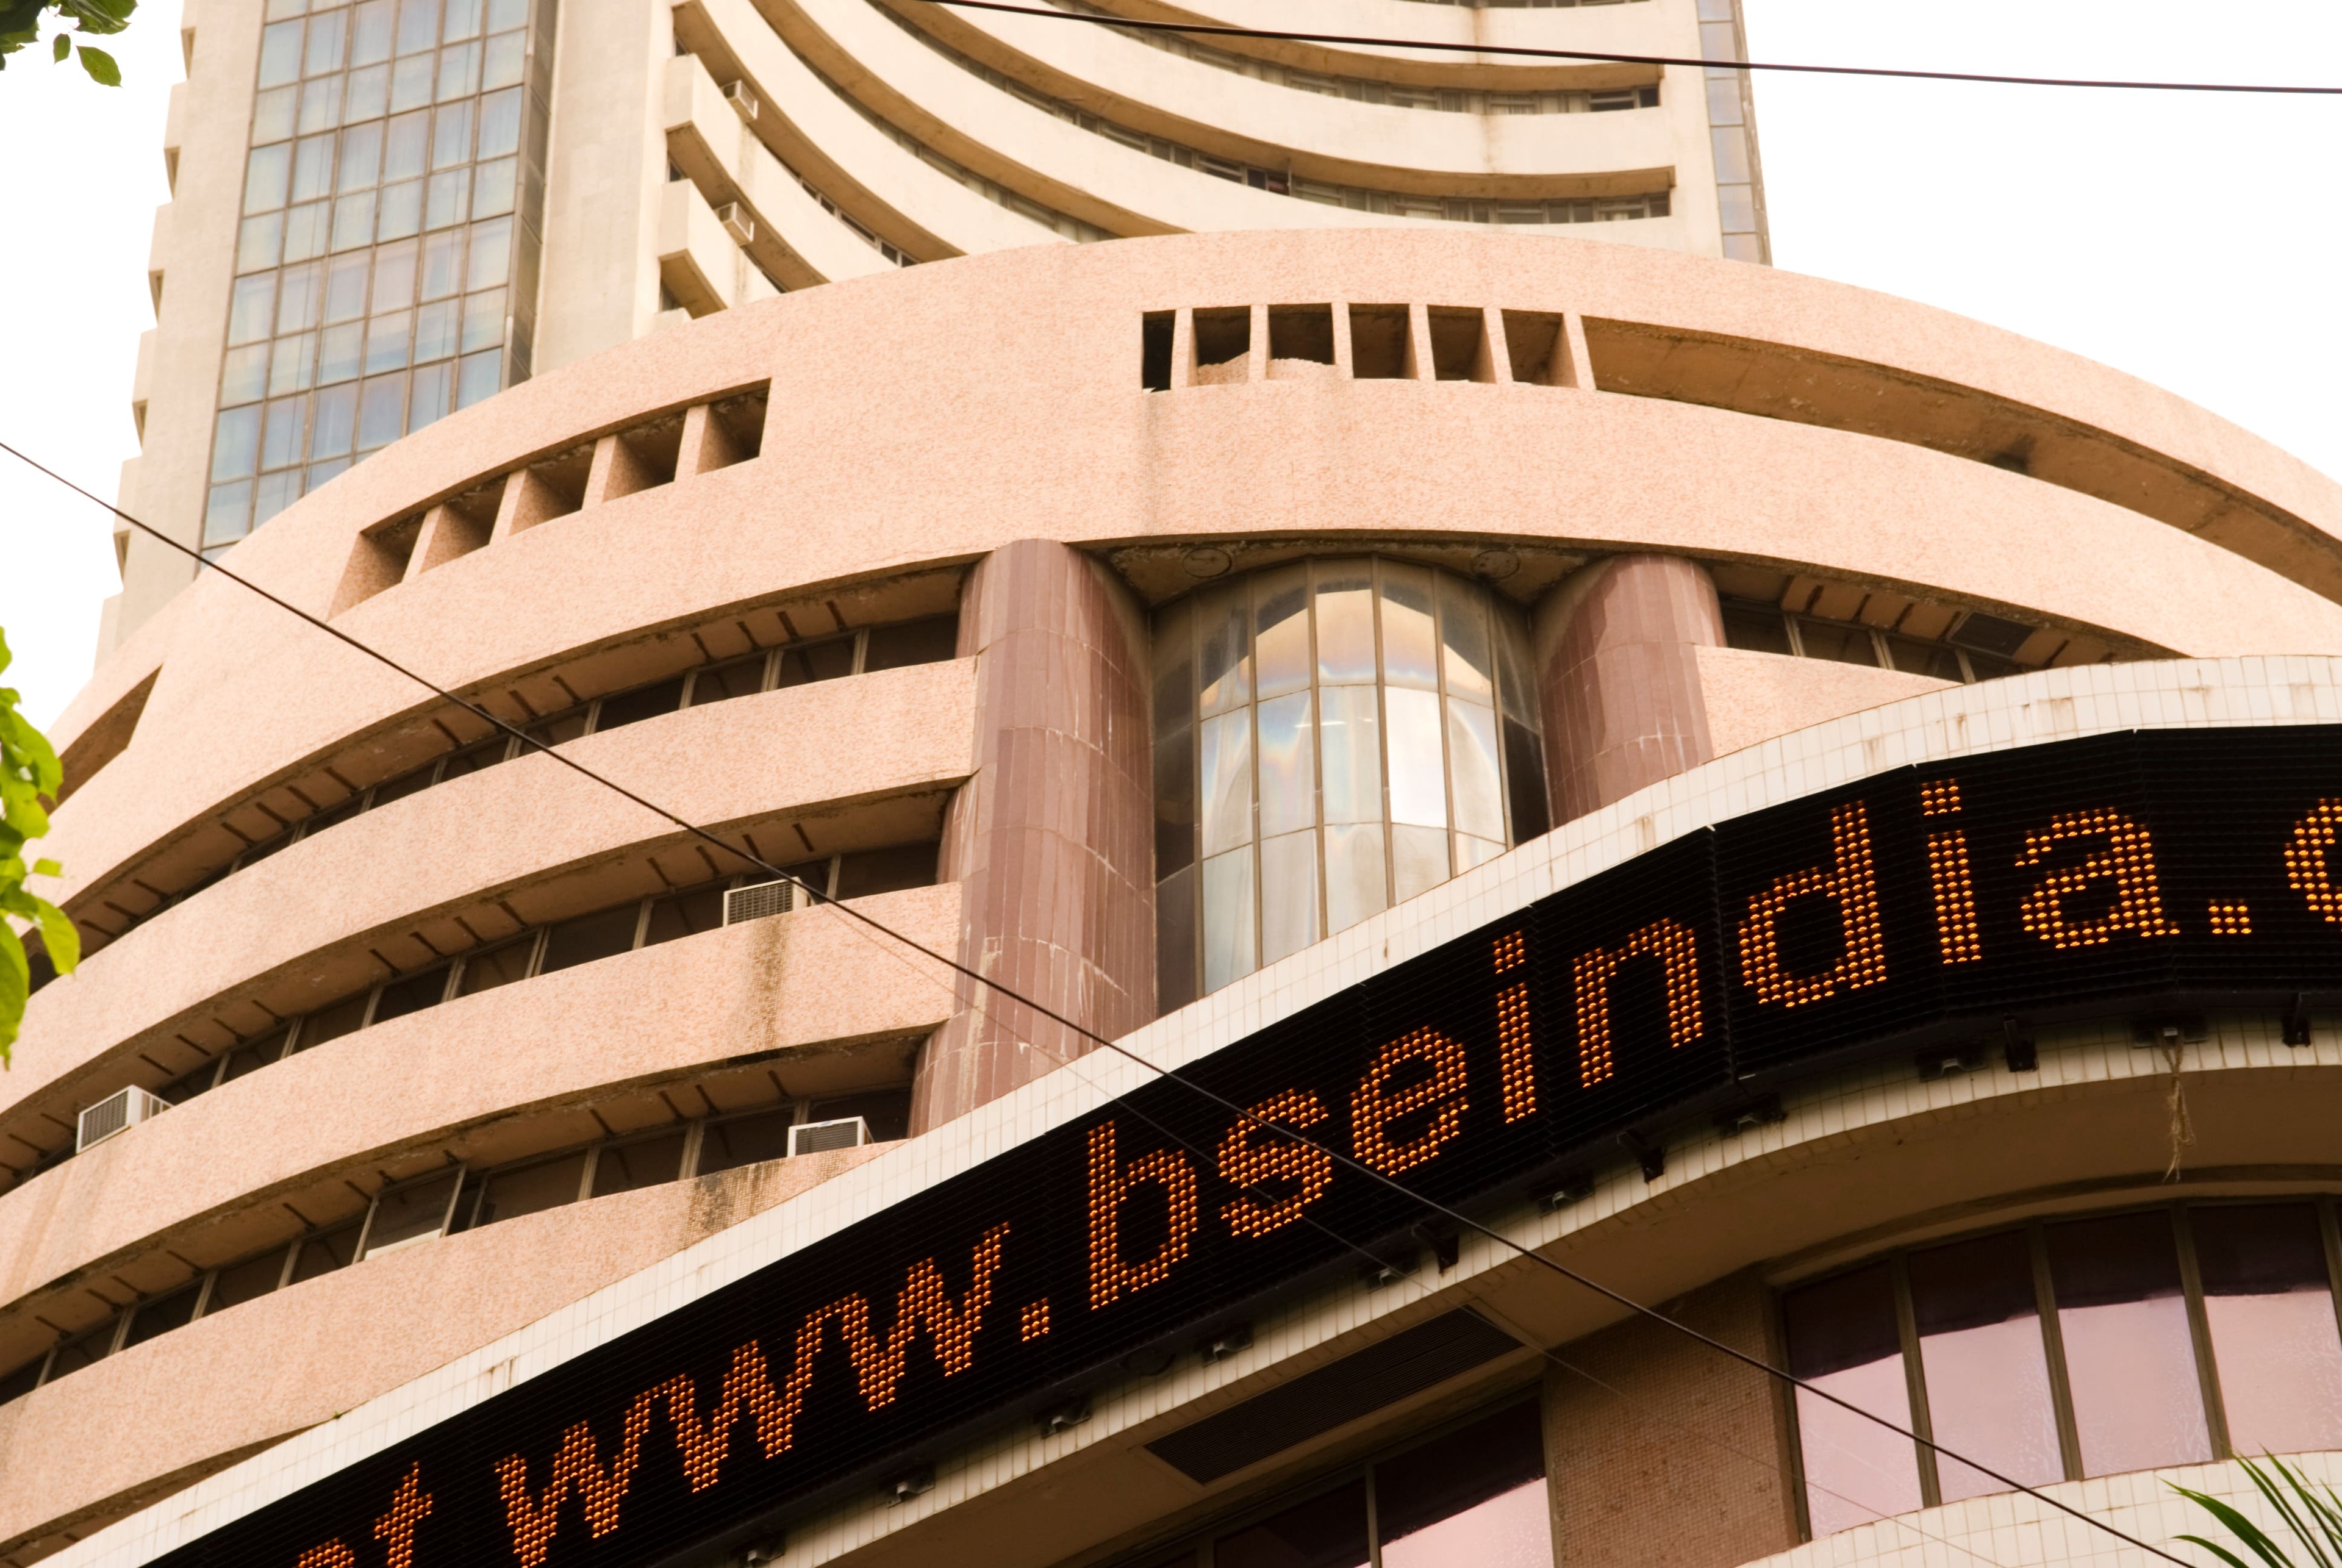 Sensex had clocked a gain of 122.02% and Nifty had rallied 126% from their March 2020 lows.